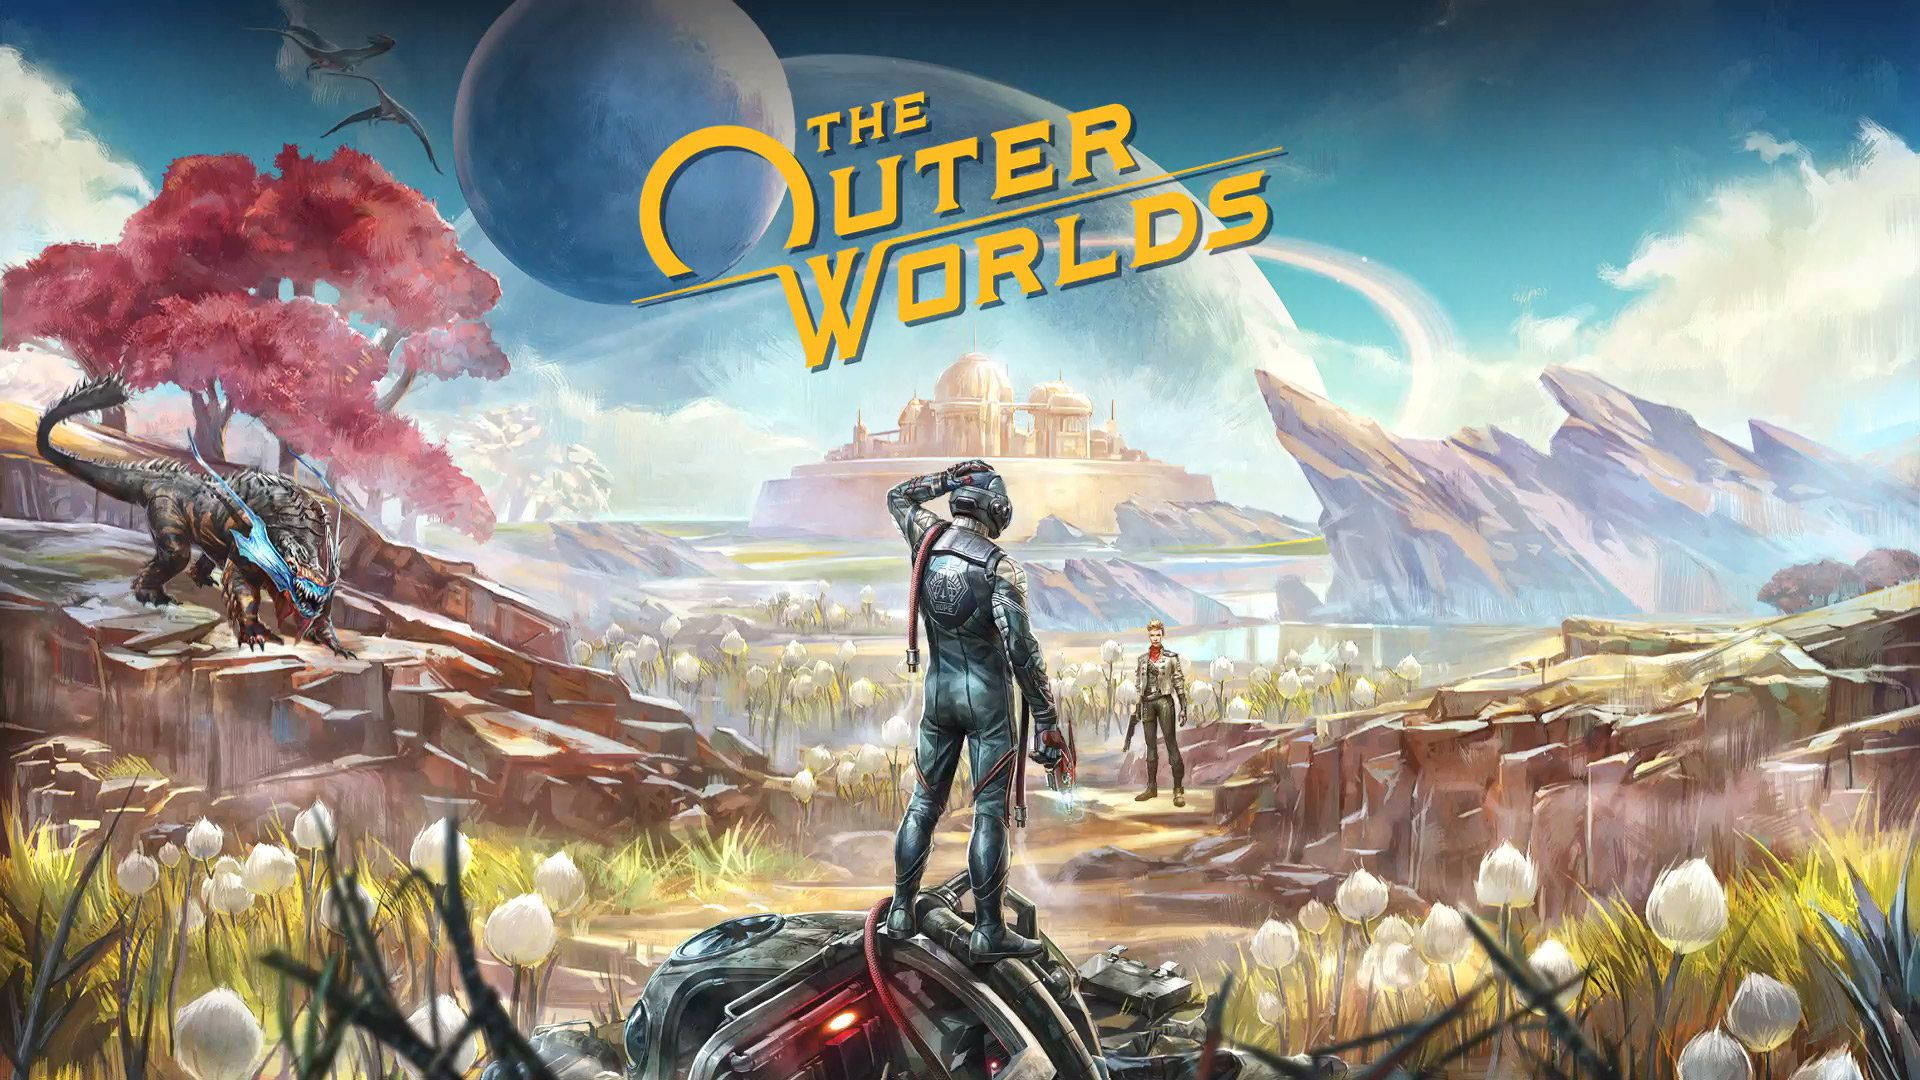 The Outer Worlds Background